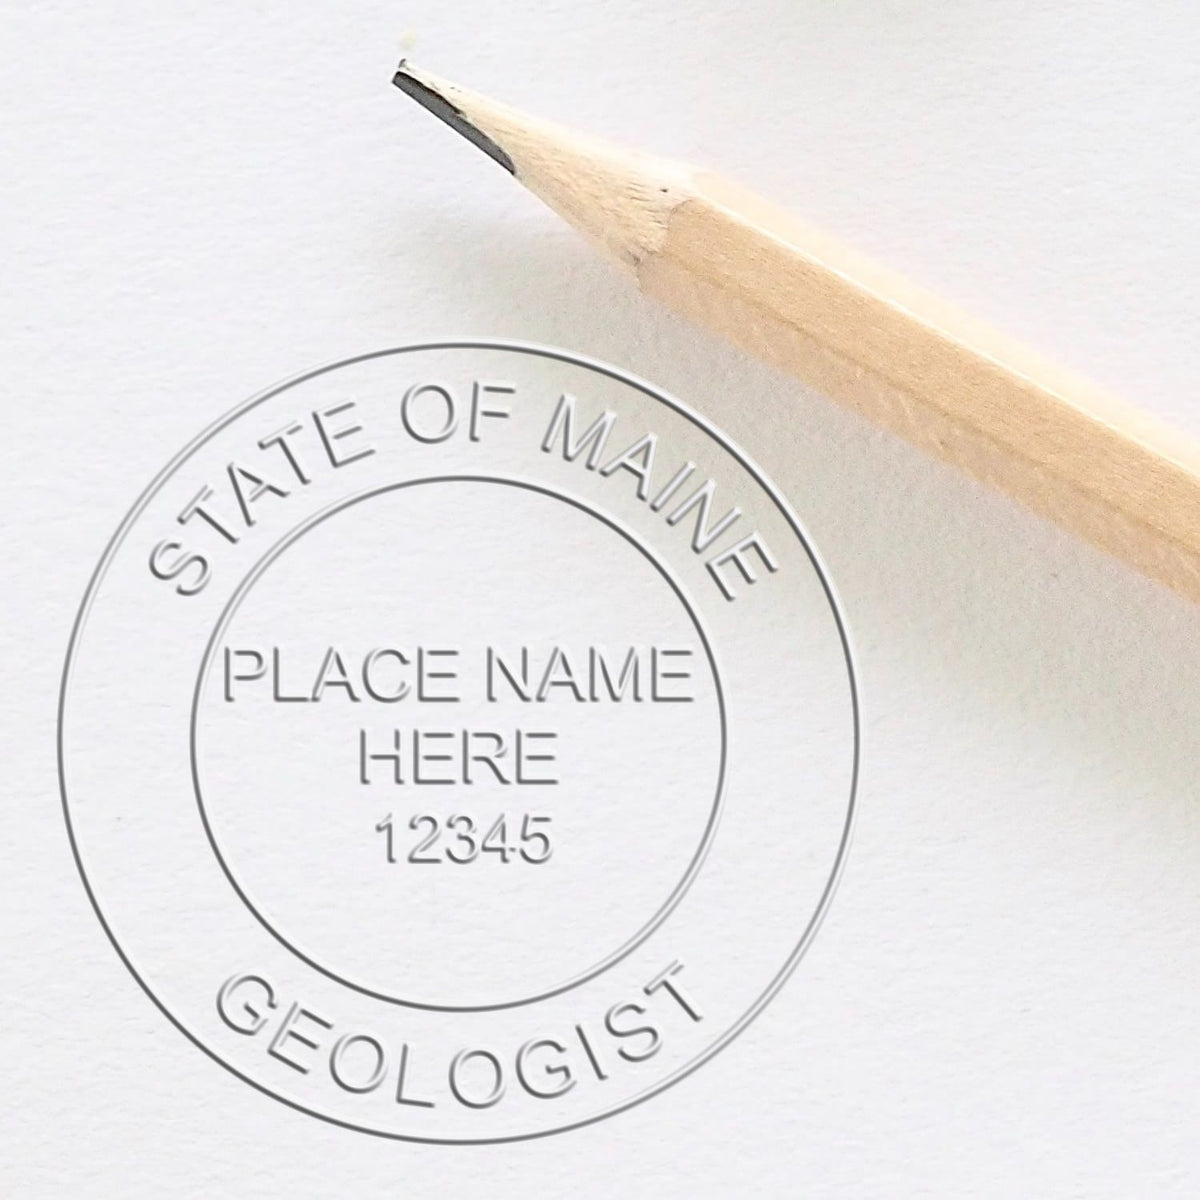 A stamped imprint of the Maine Geologist Desk Seal in this stylish lifestyle photo, setting the tone for a unique and personalized product.